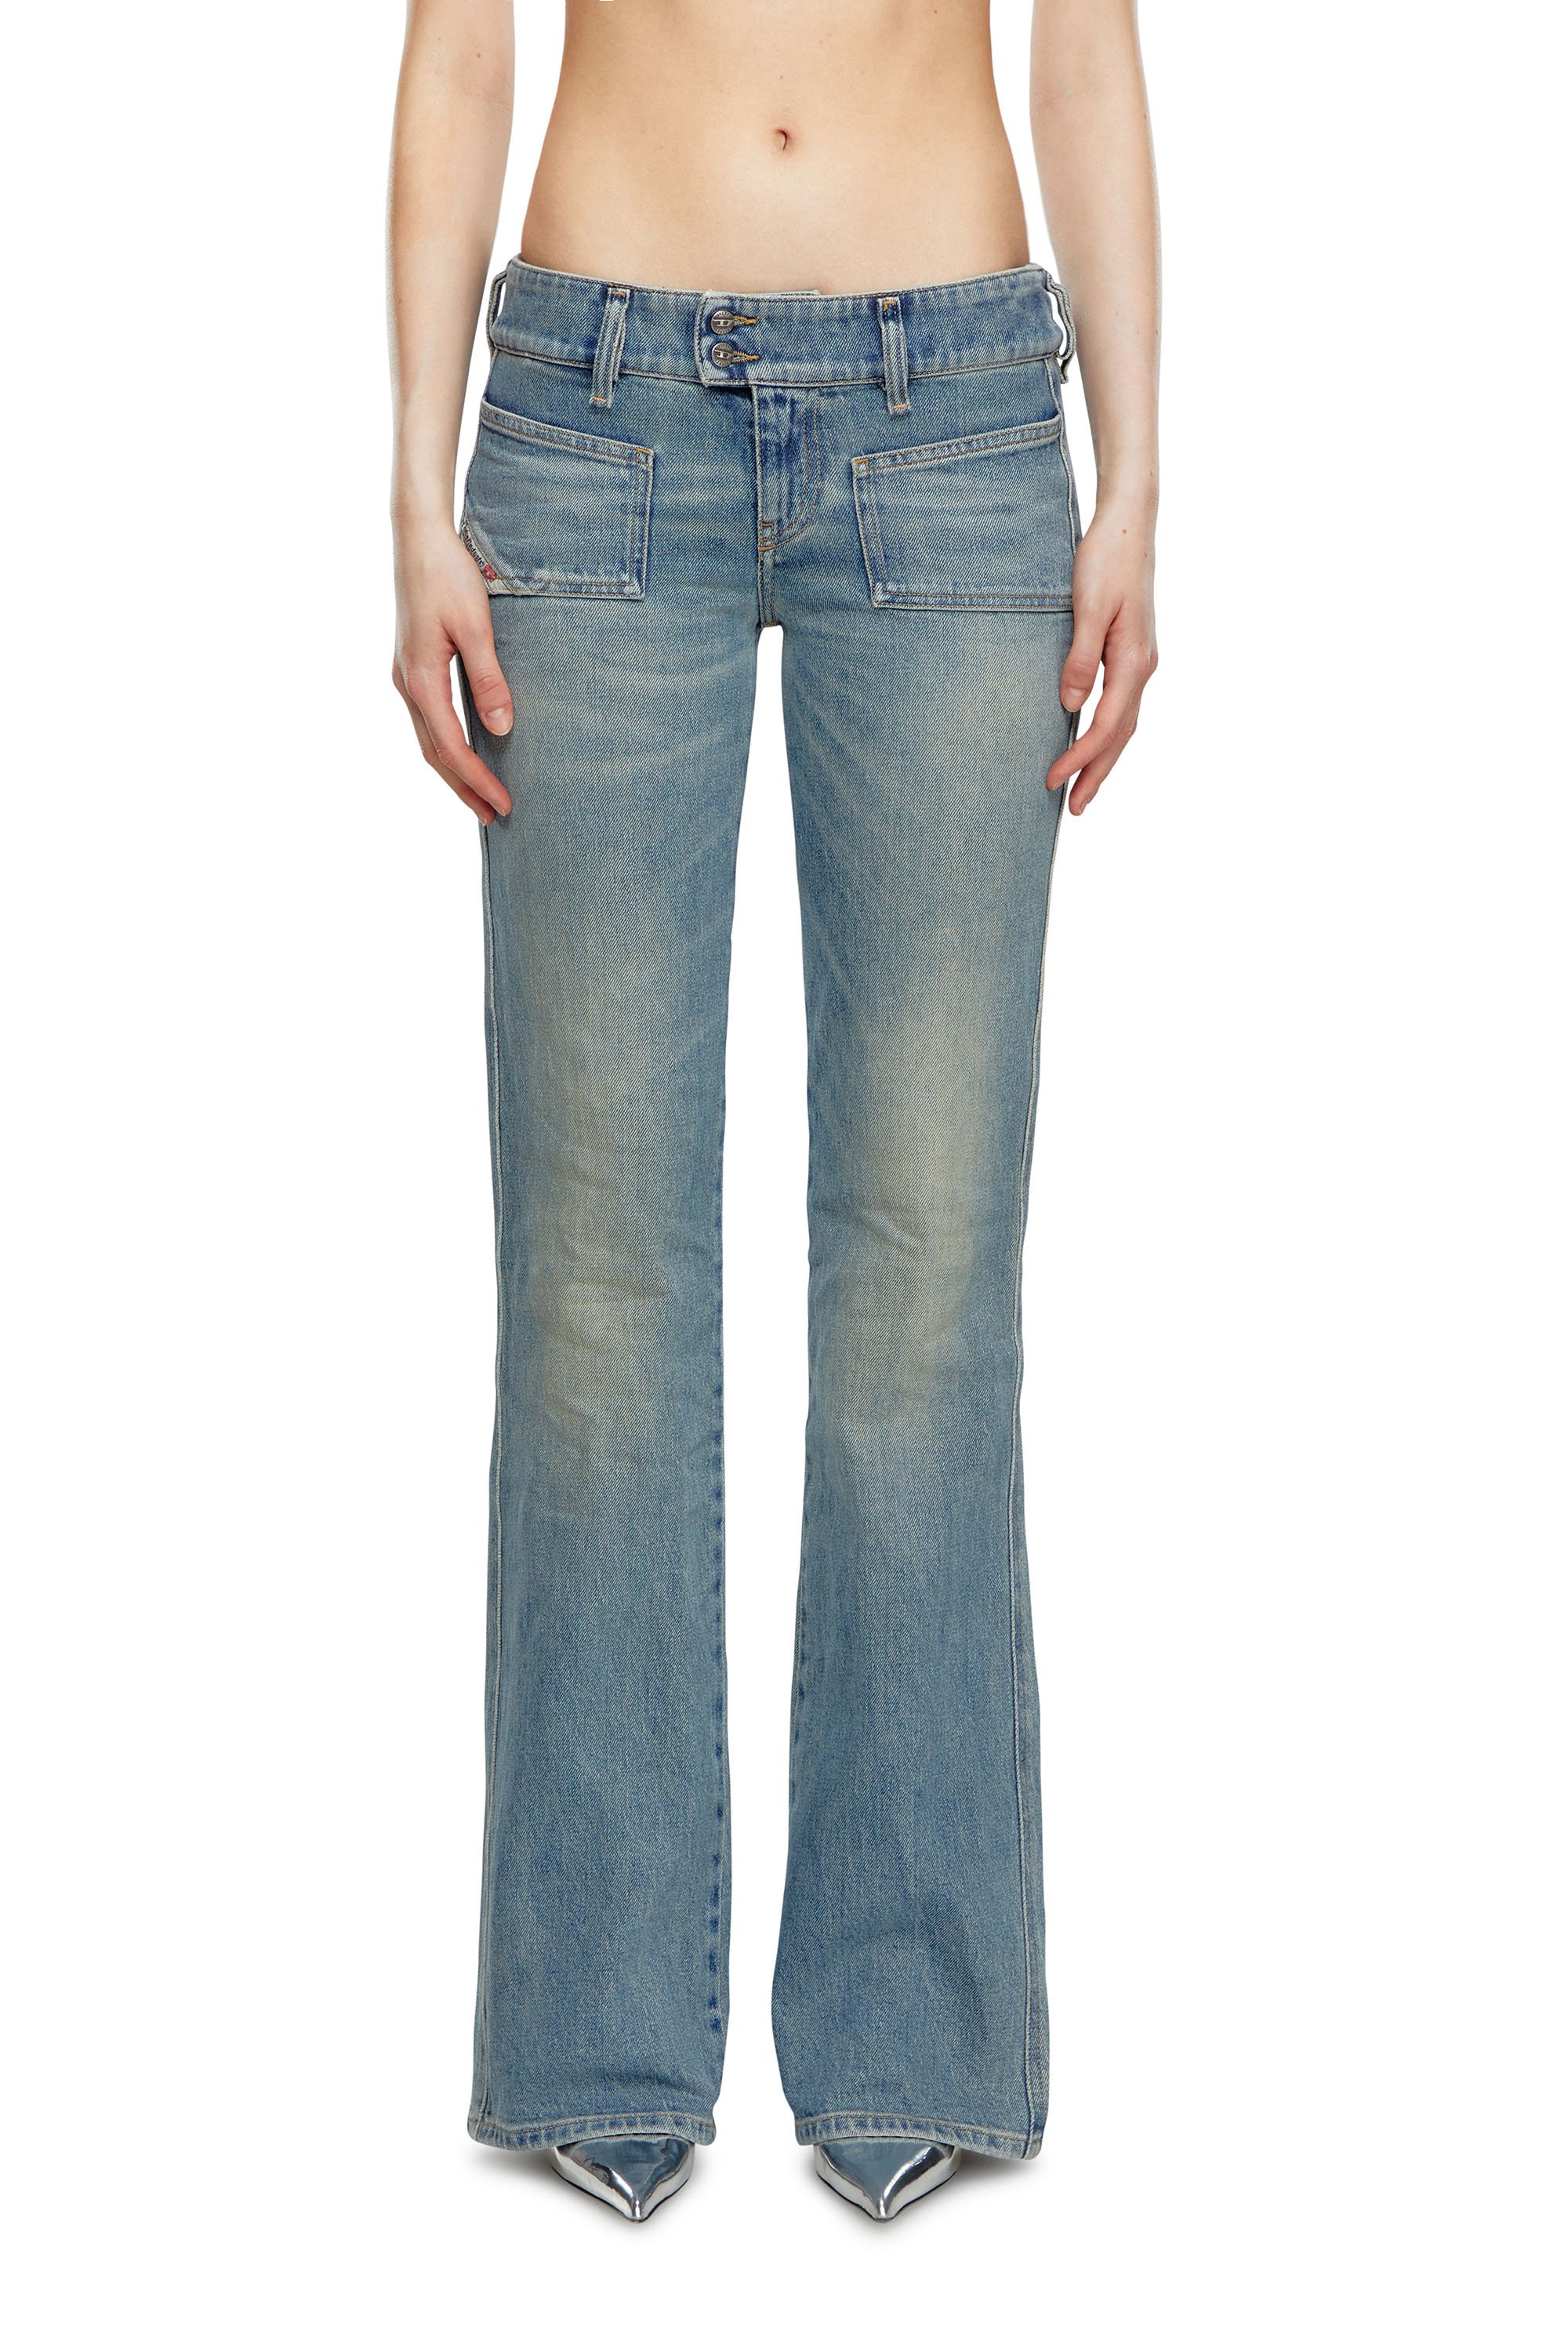 Diesel - Bootcut and Flare Jeans D-Hush 09J55, Mujer Bootcut y Flare Jeans - D-Hush in Azul marino - Image 1